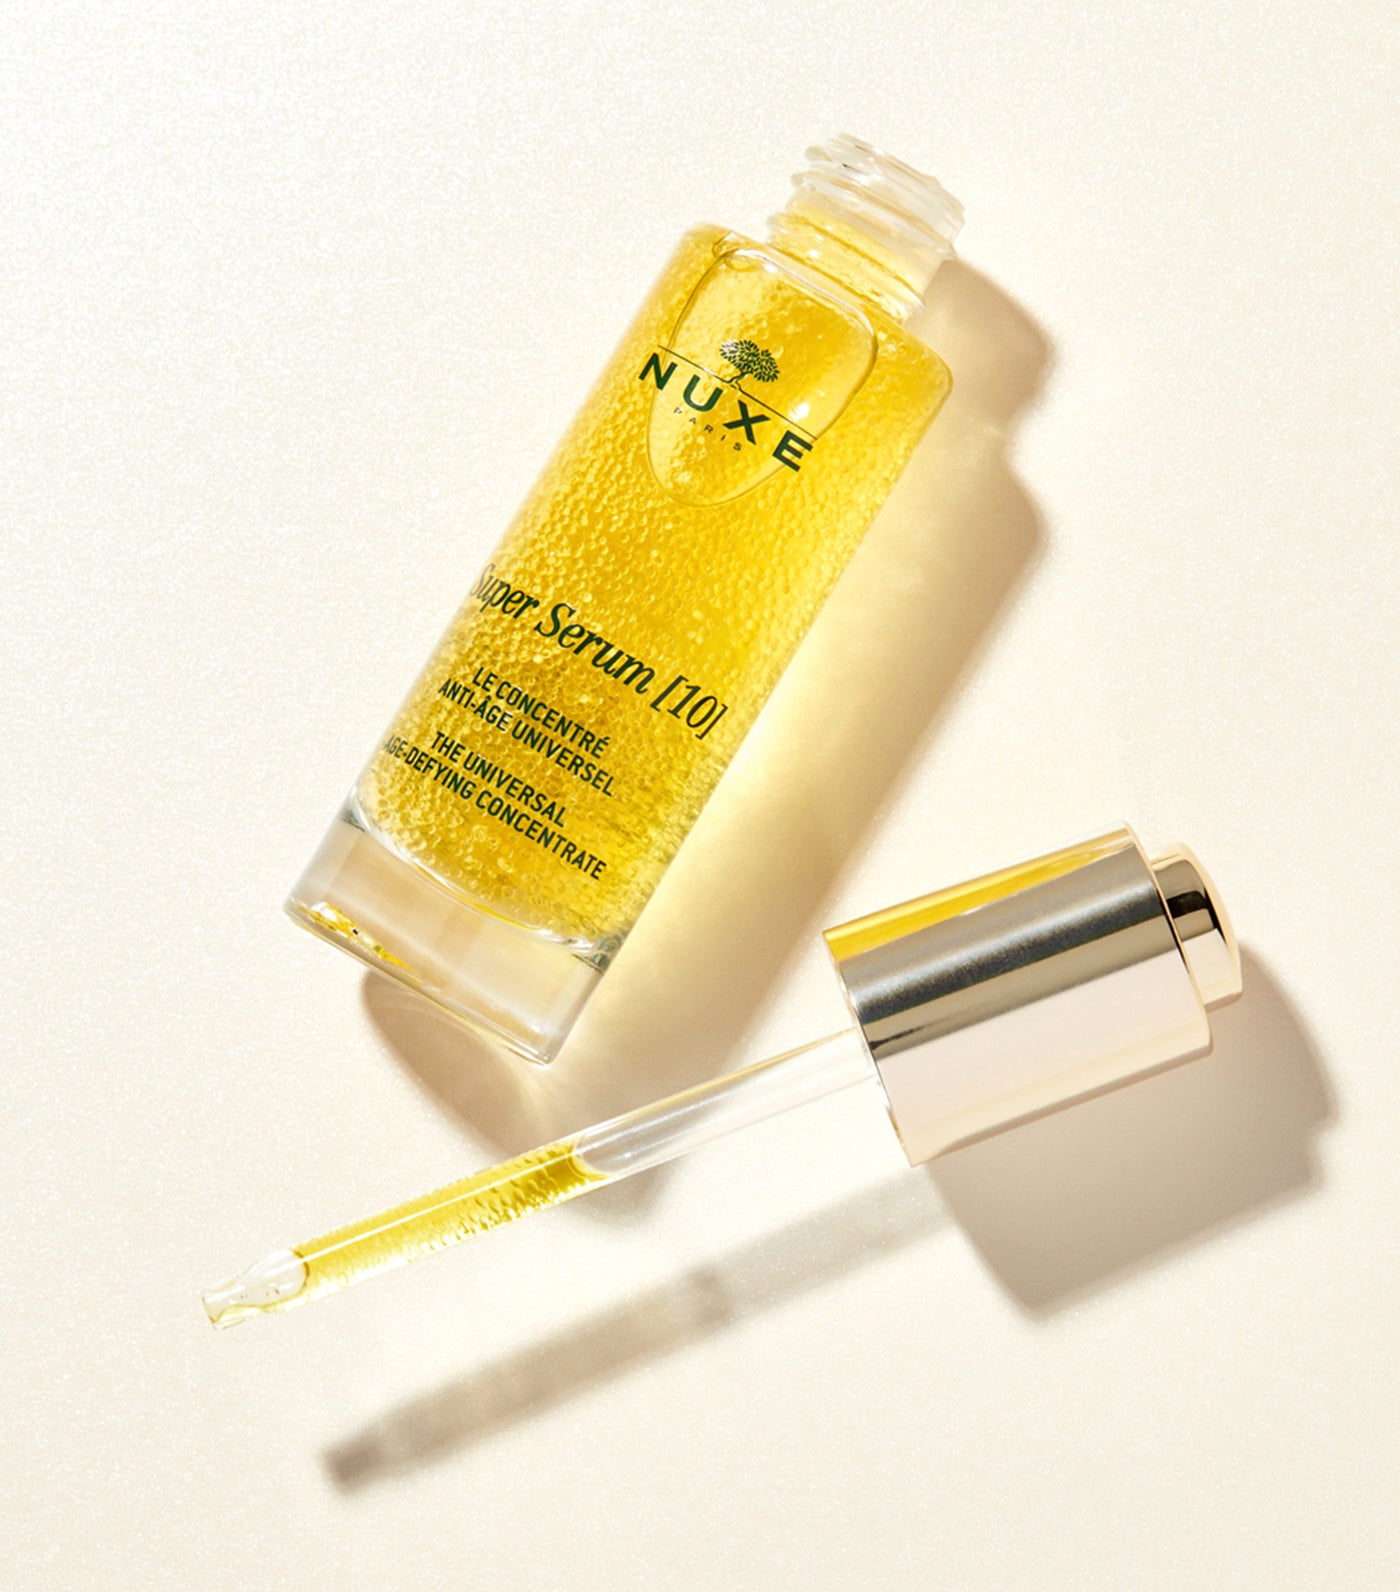 Super Serum [10], The Universal Anti-aging Concentrate